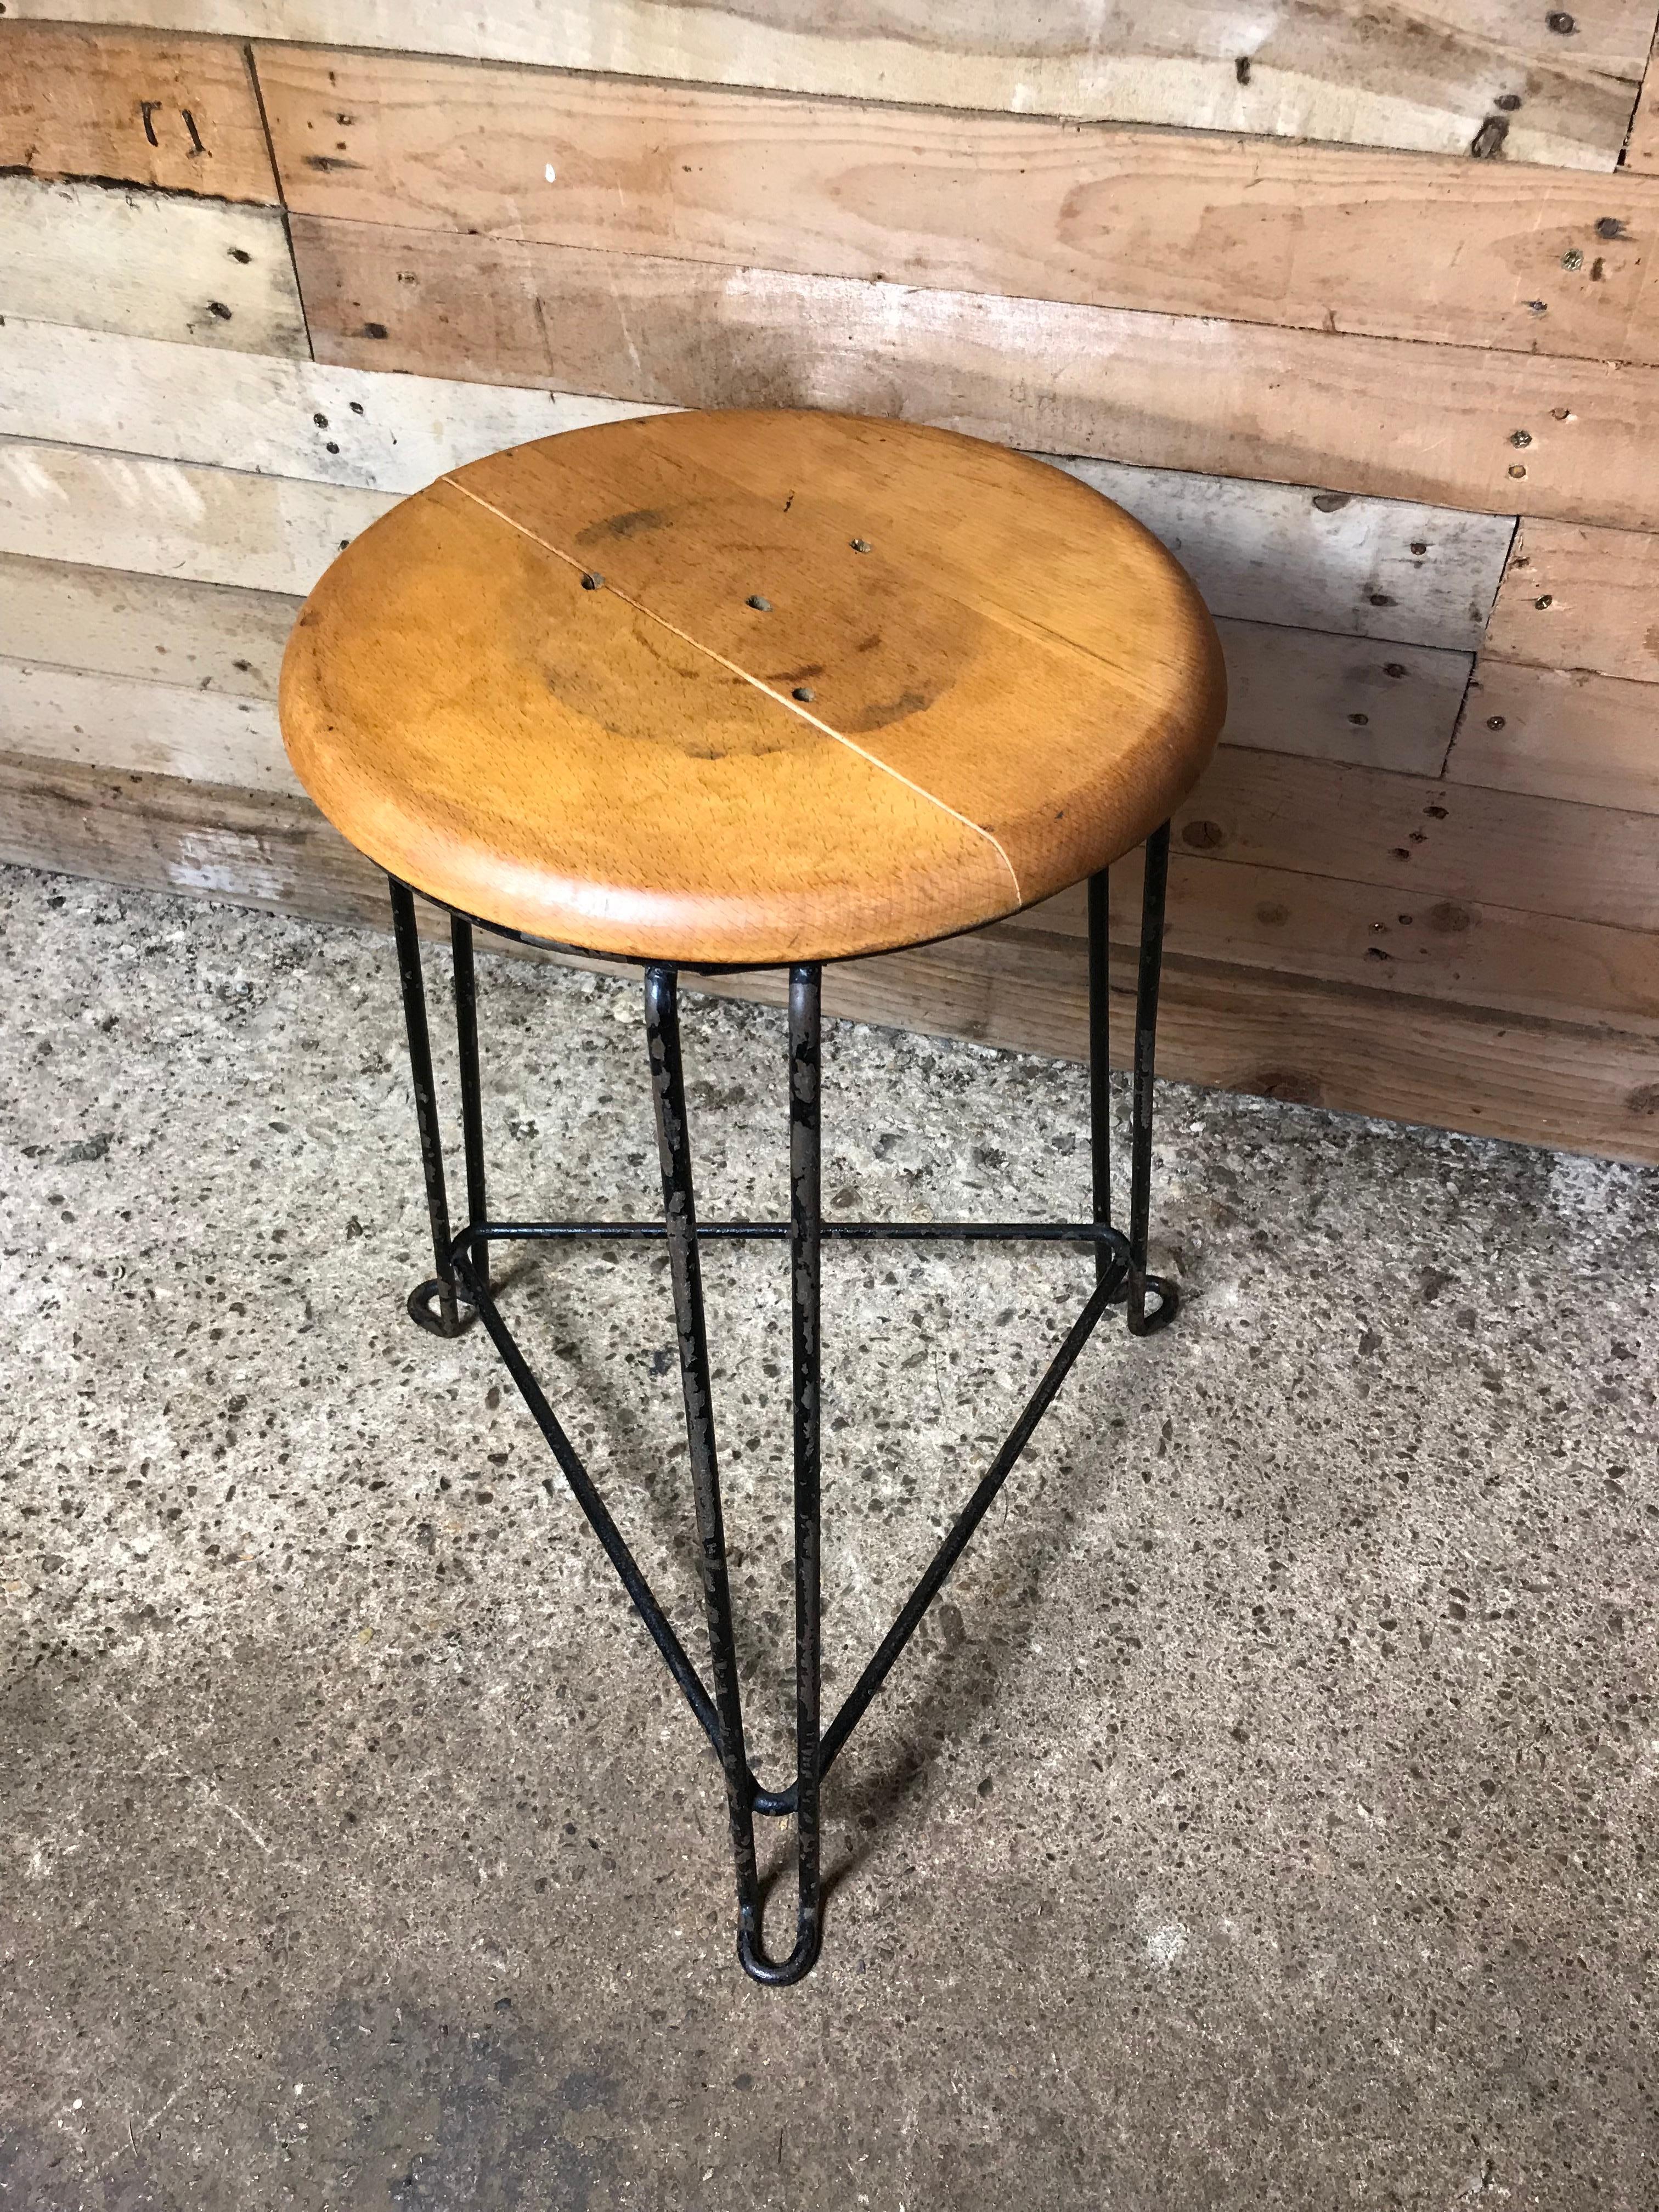 Set of 4 Retro 1960s Wooden Seat with Metal Frame Tomado Stools For Sale 1